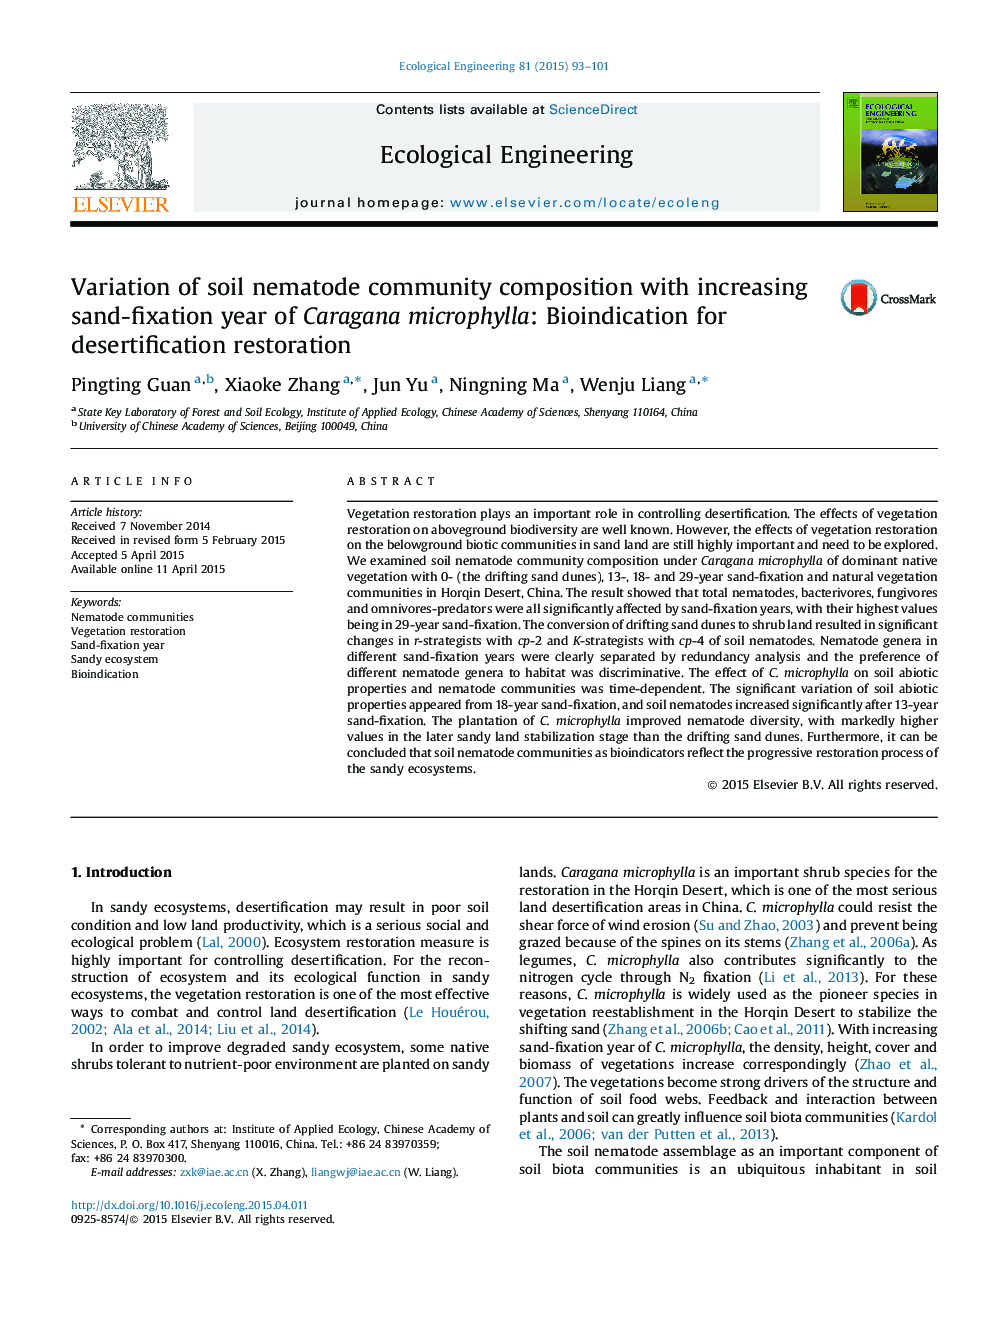 Variation of soil nematode community composition with increasing sand-fixation year of Caragana microphylla: Bioindication for desertification restoration